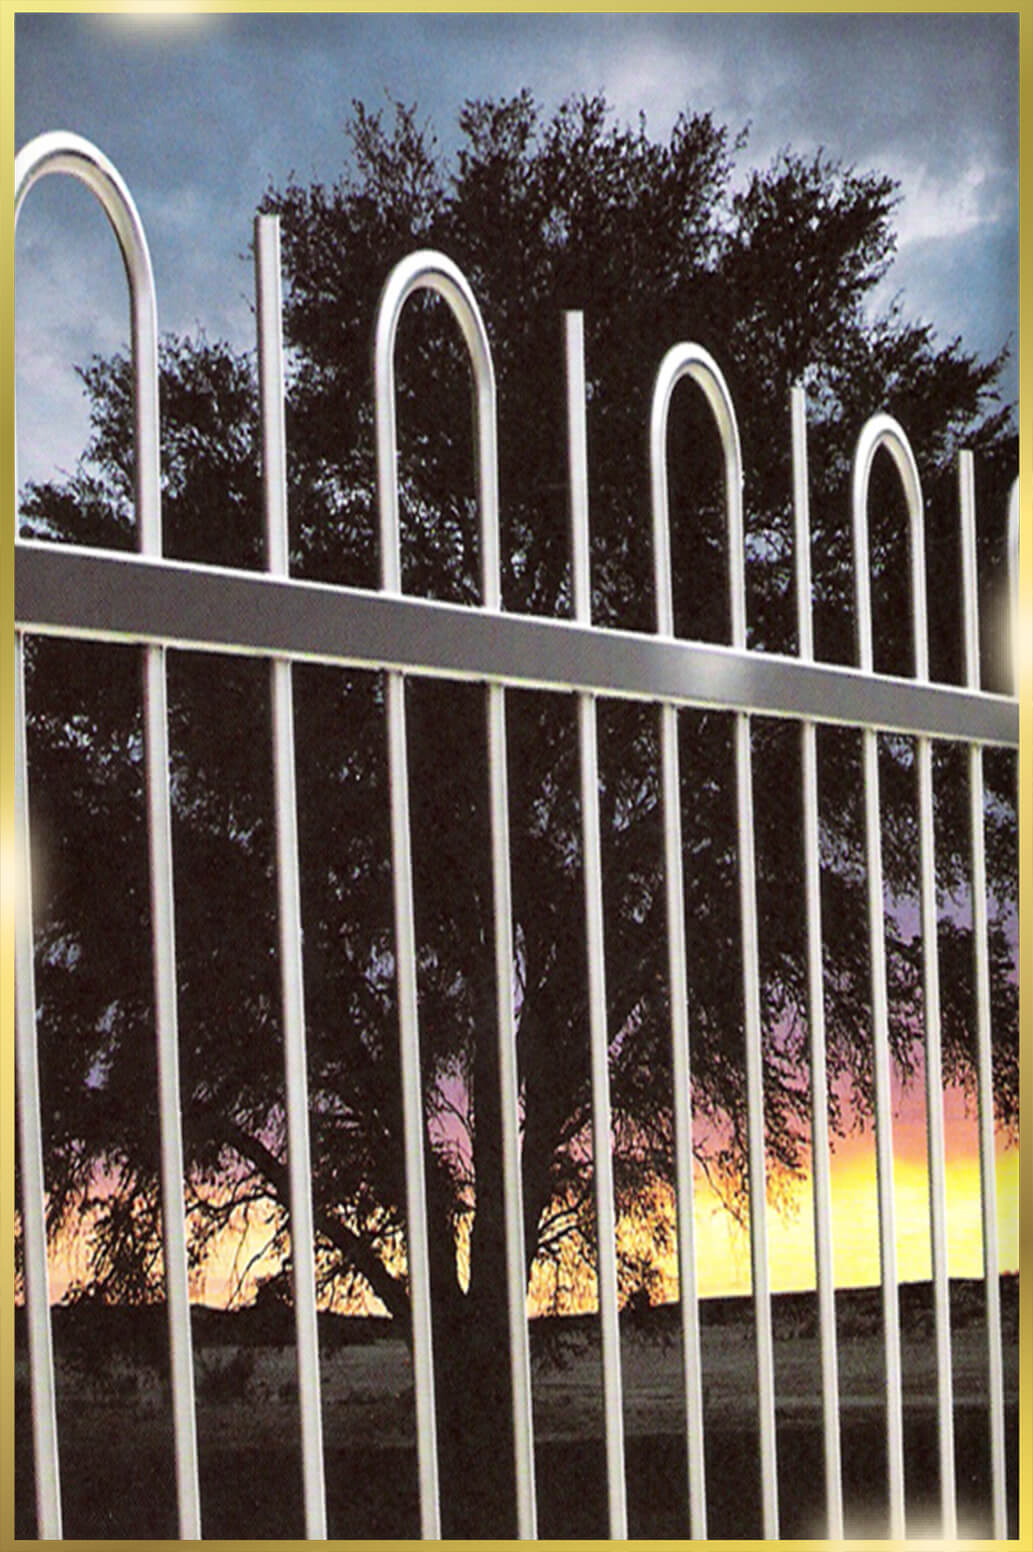 Stainless Steel Fencing Panel Fabricators